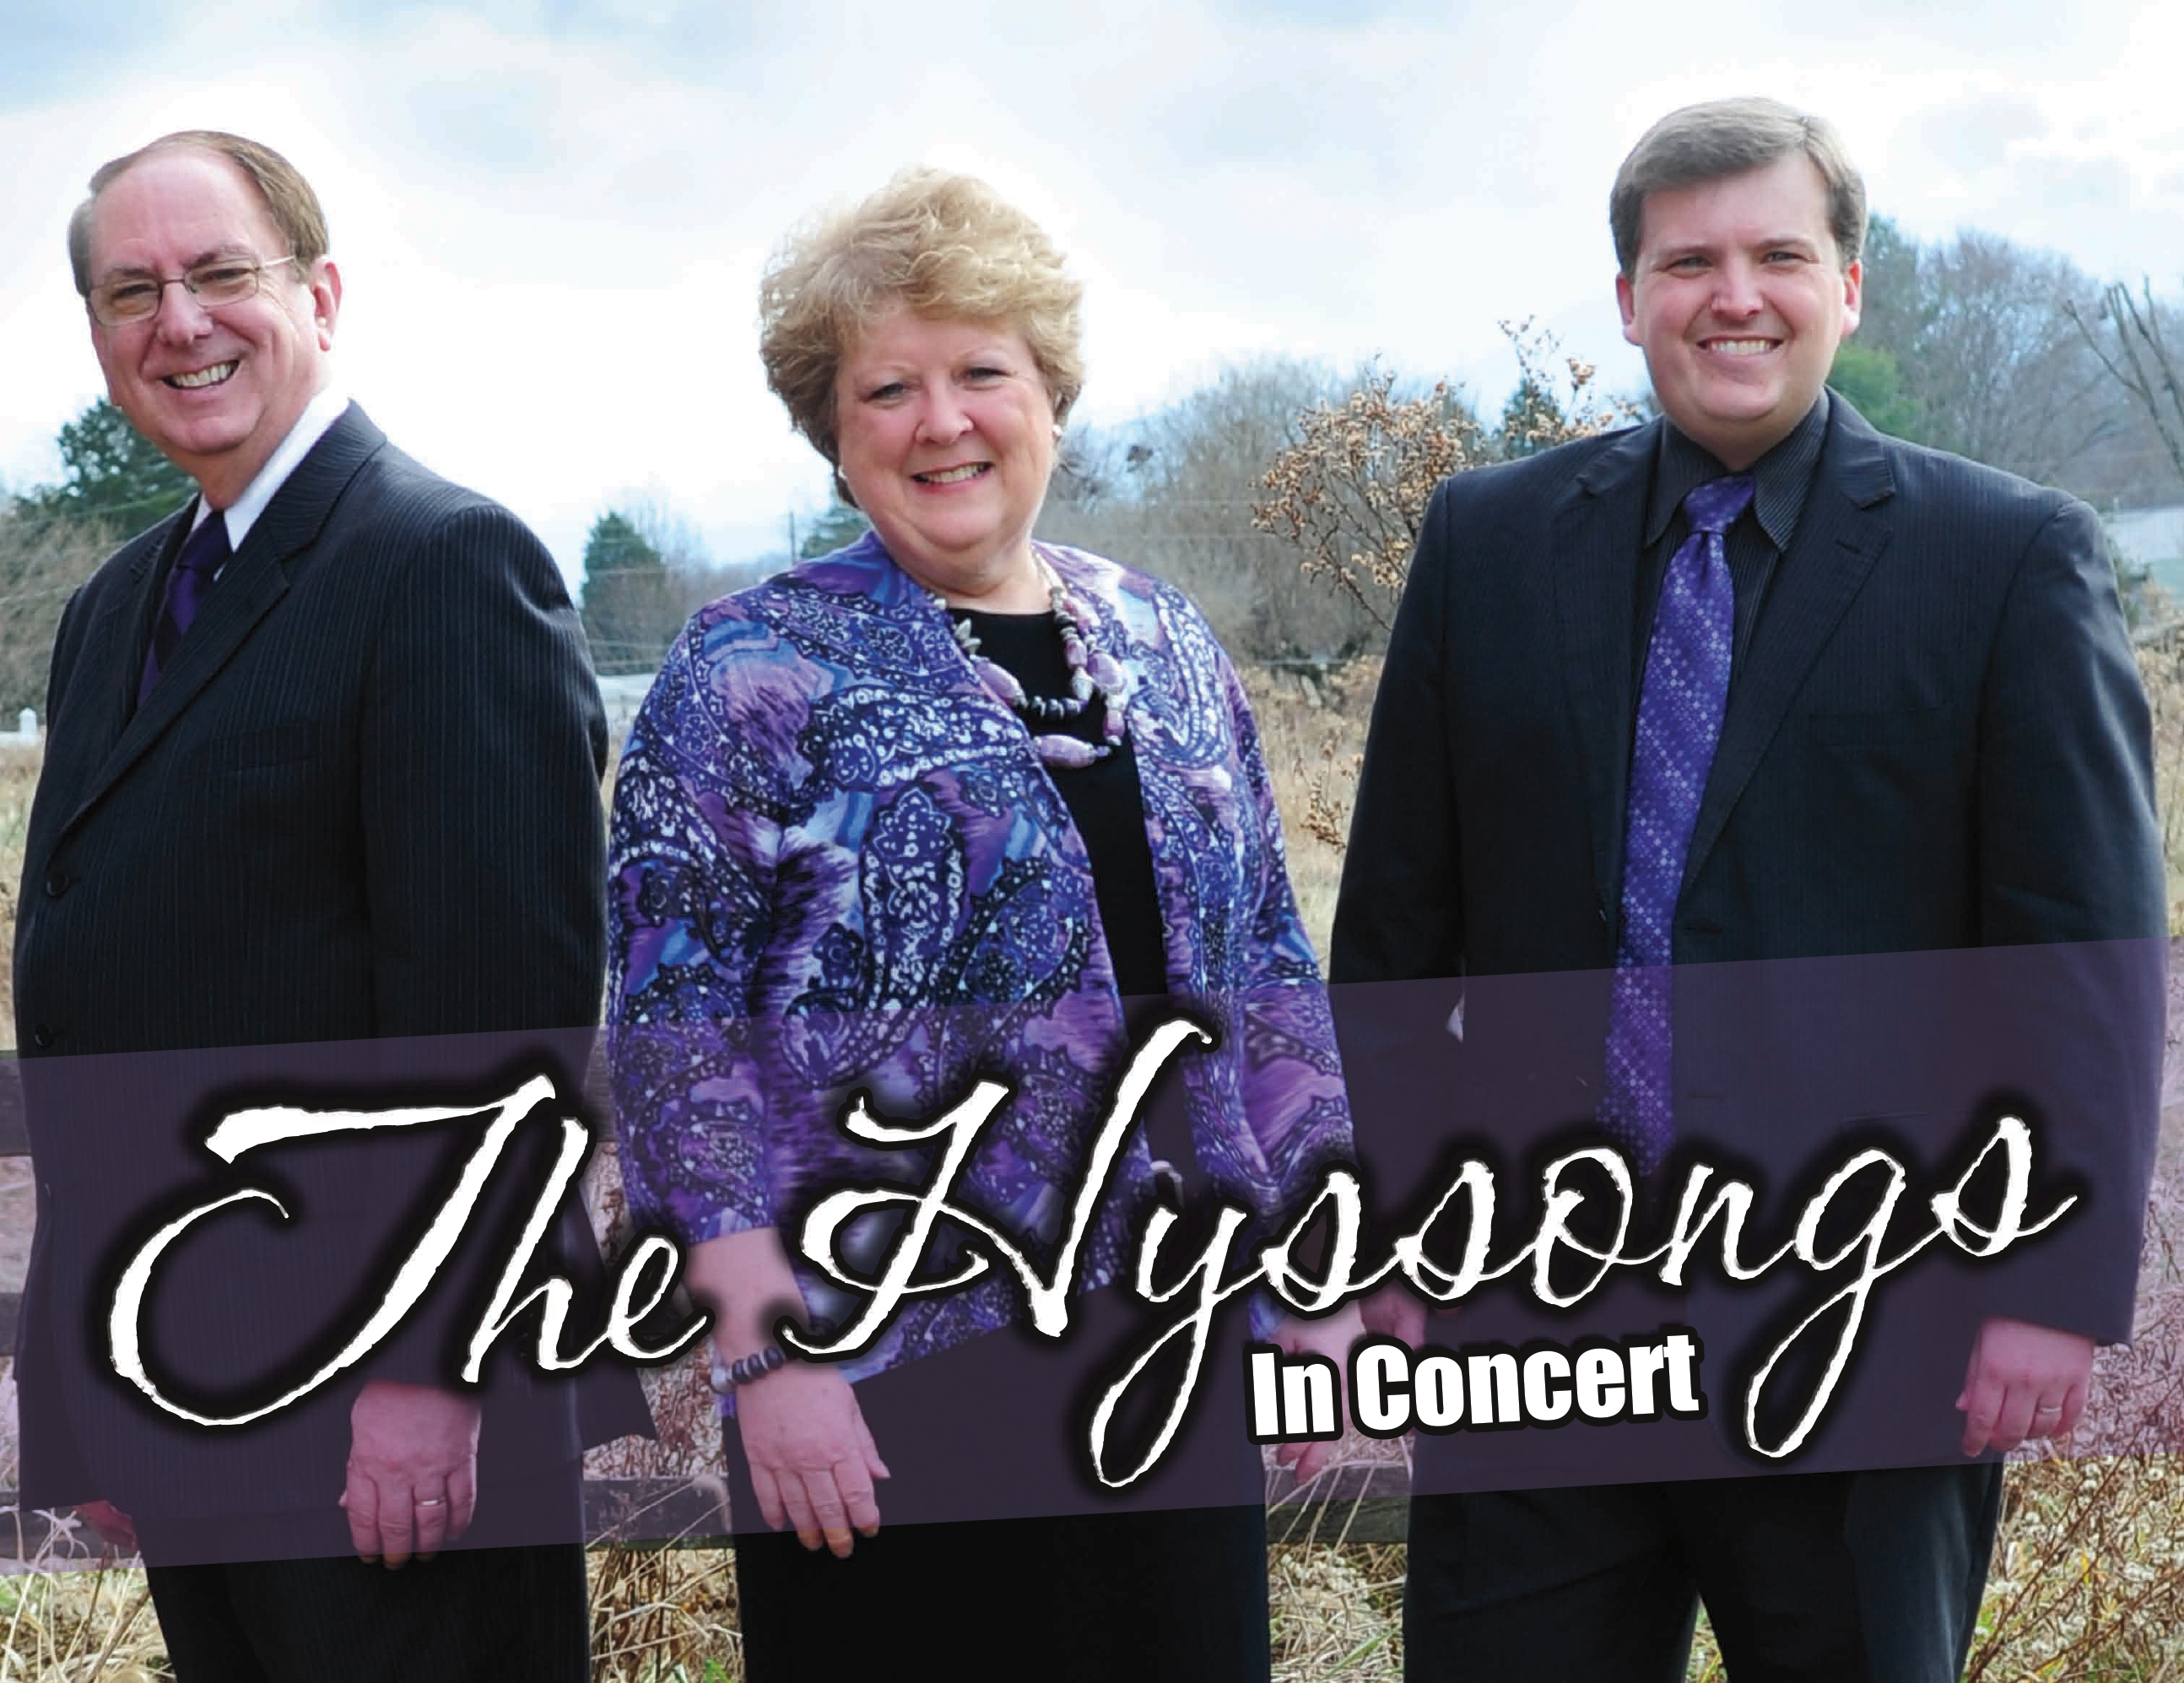 Hyssongs in Concert